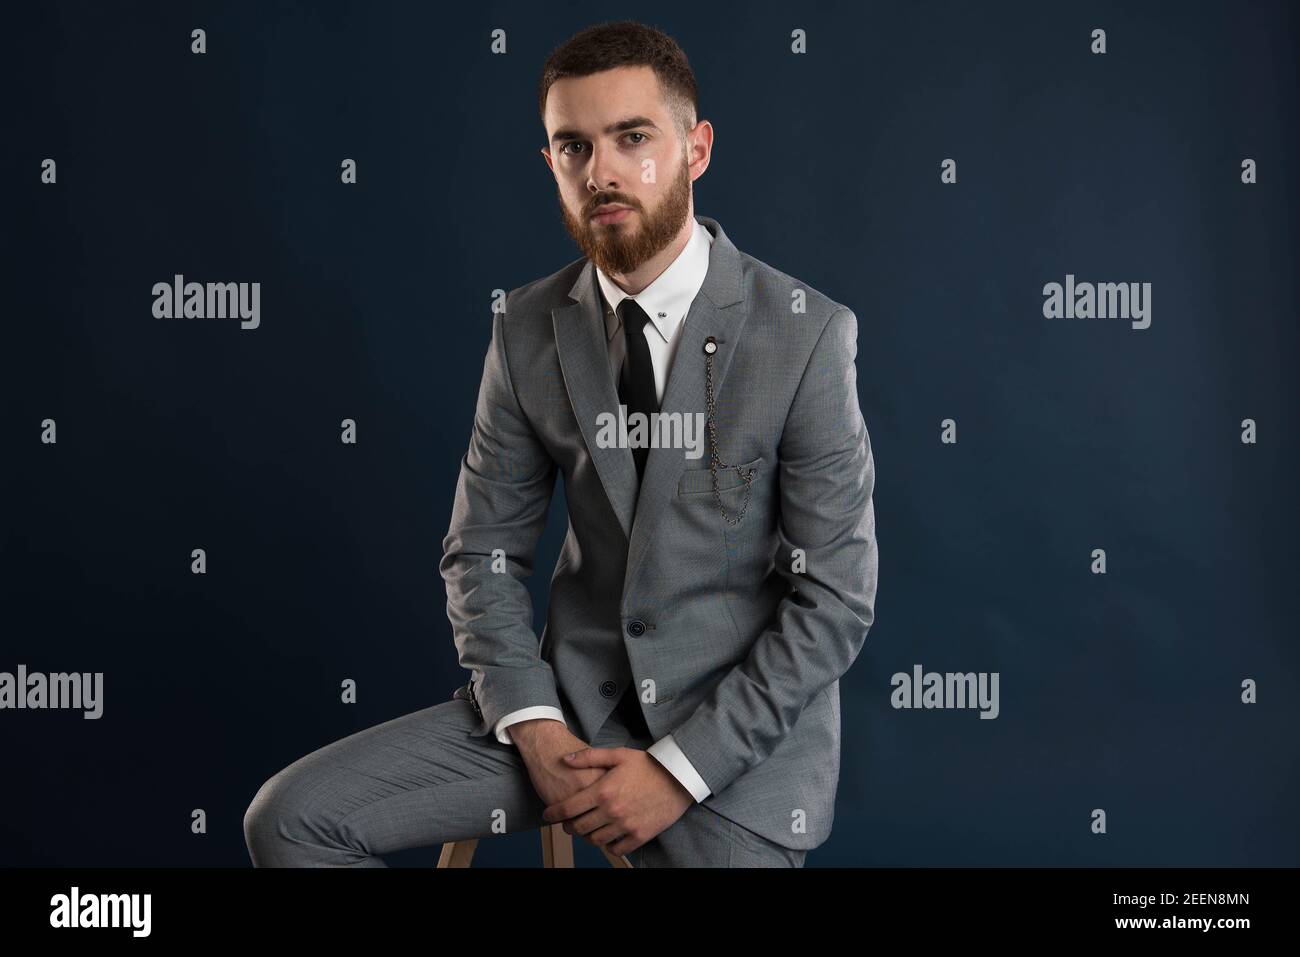 Portrait of a young gentleman sitting on a stool wearing a grey suit and black tie Stock Photo